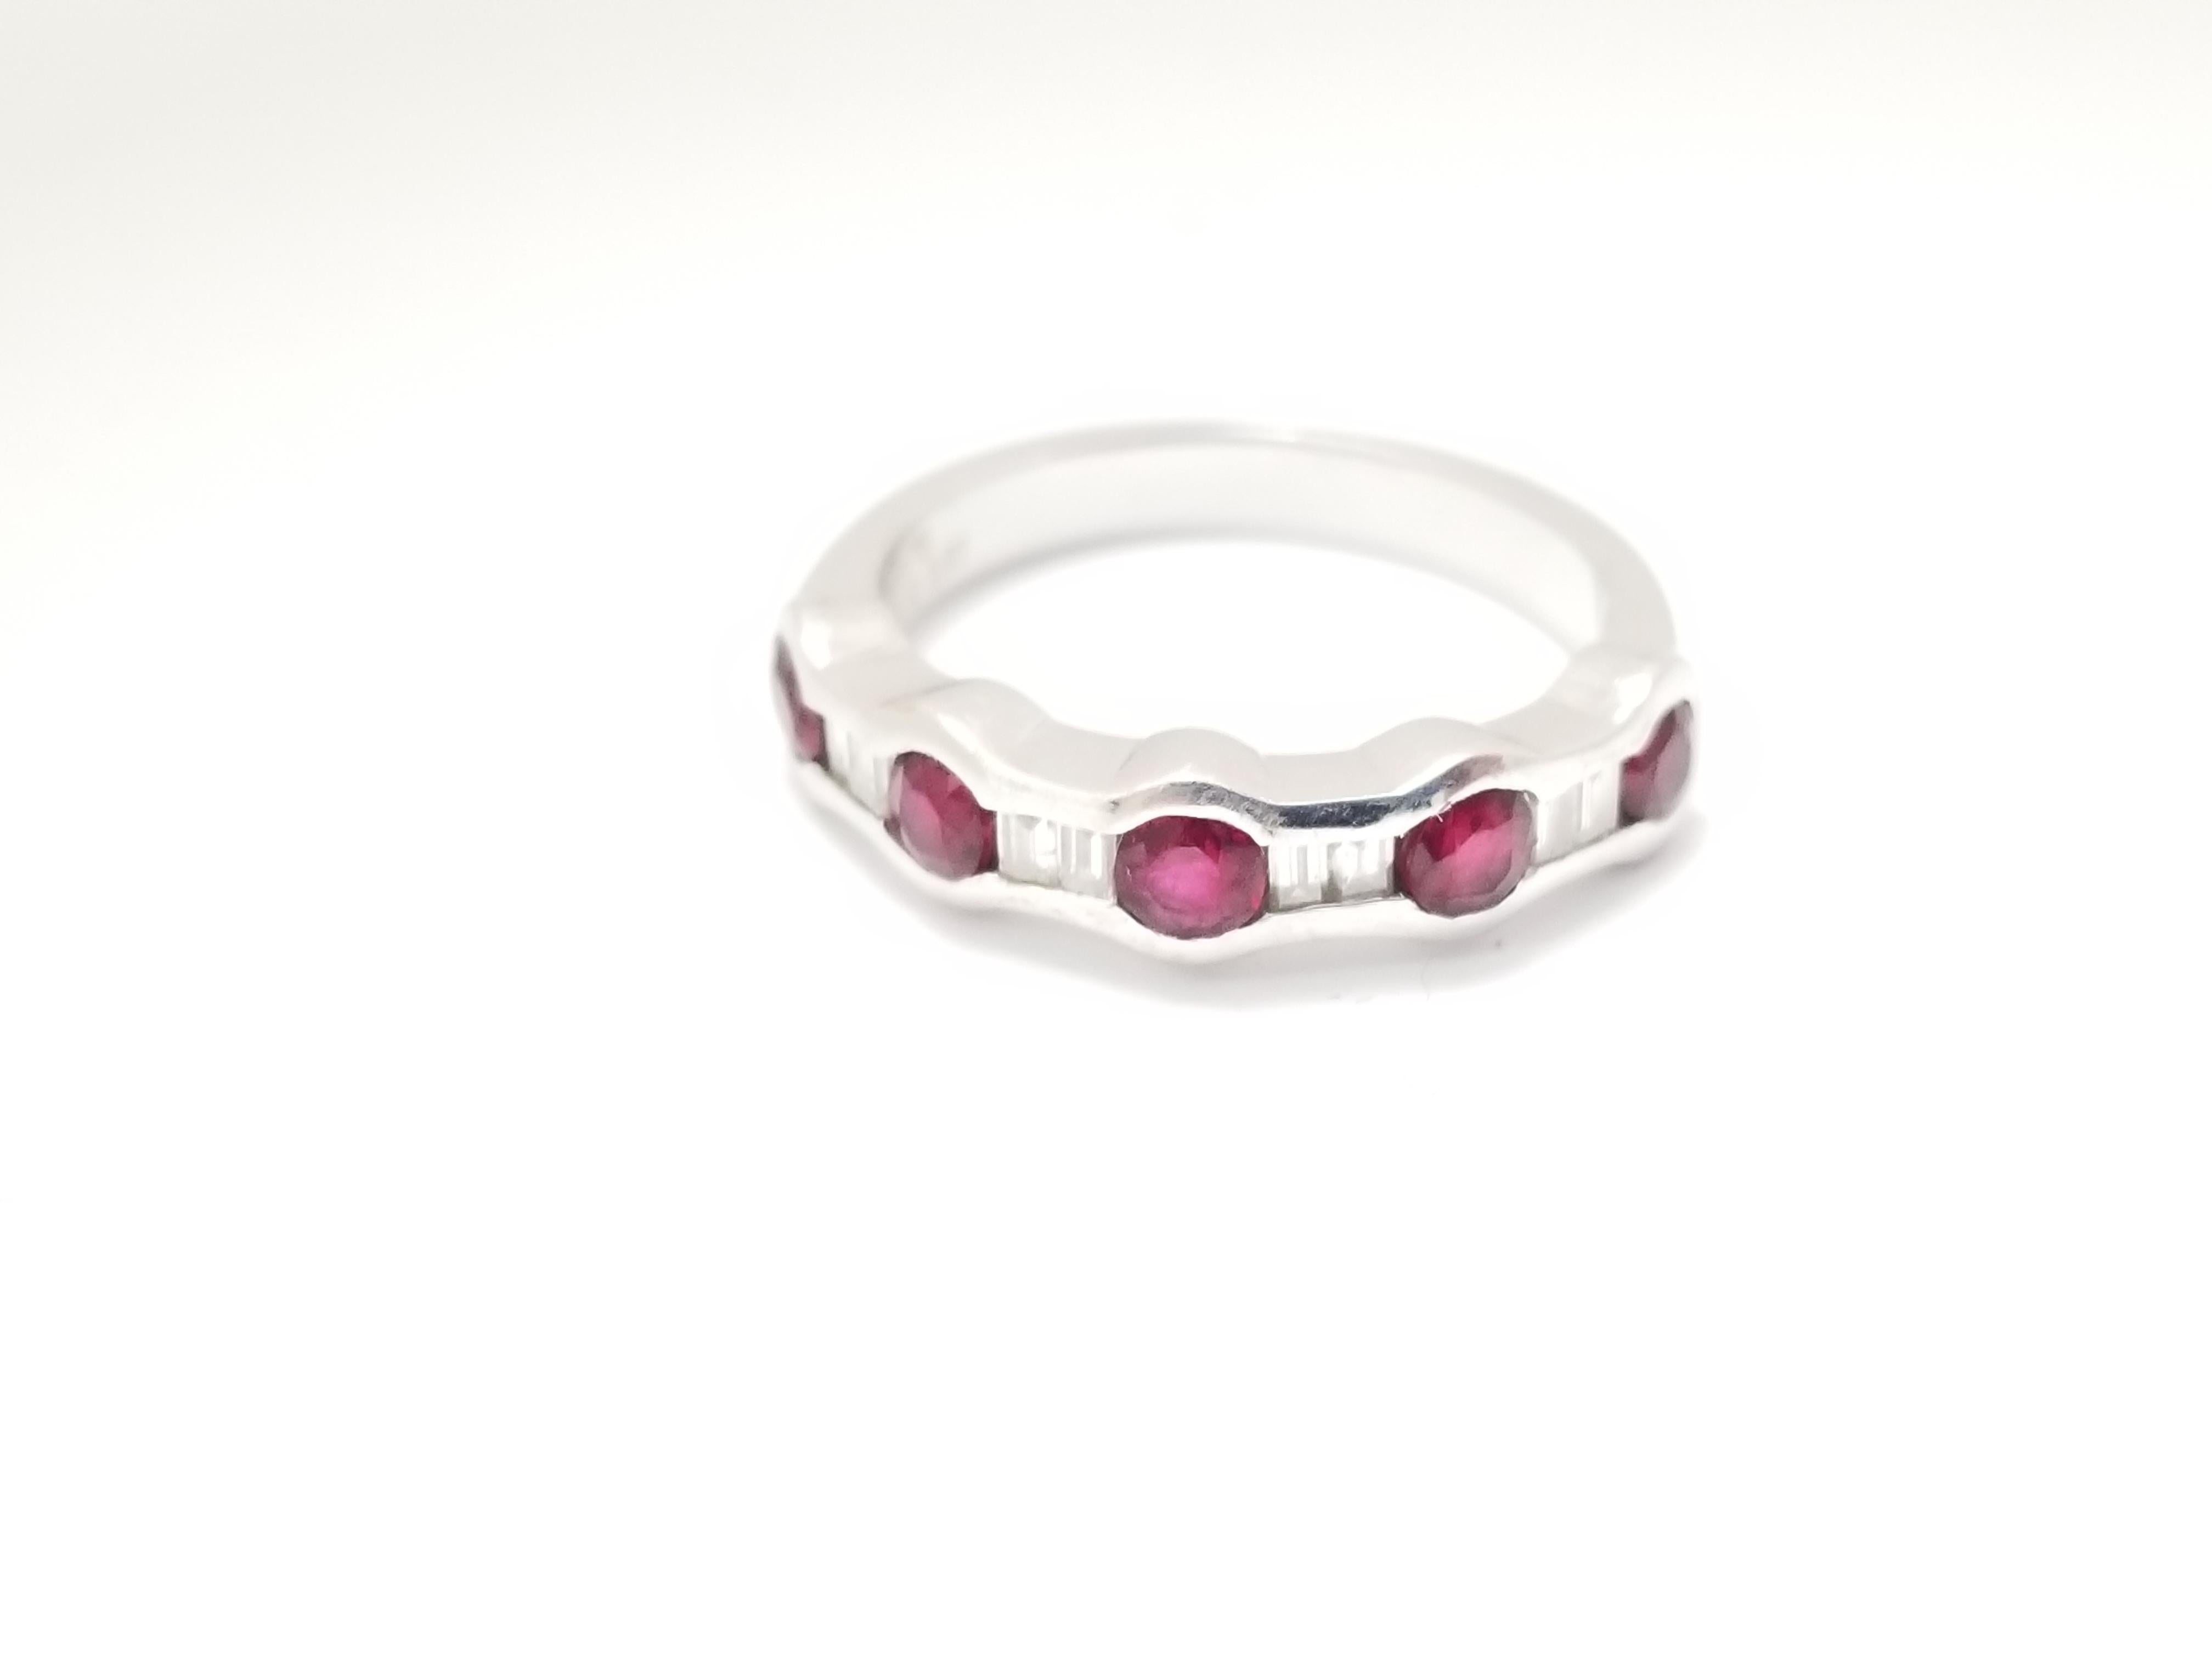 Genuine Ruby Round Shape diamonds ring 18K white gold. Unique, Brilliant, and Beautiful.
Ruby Size: 0.93 cttw
Diamonds: 0.24 cttw
Ring Size: 6.75